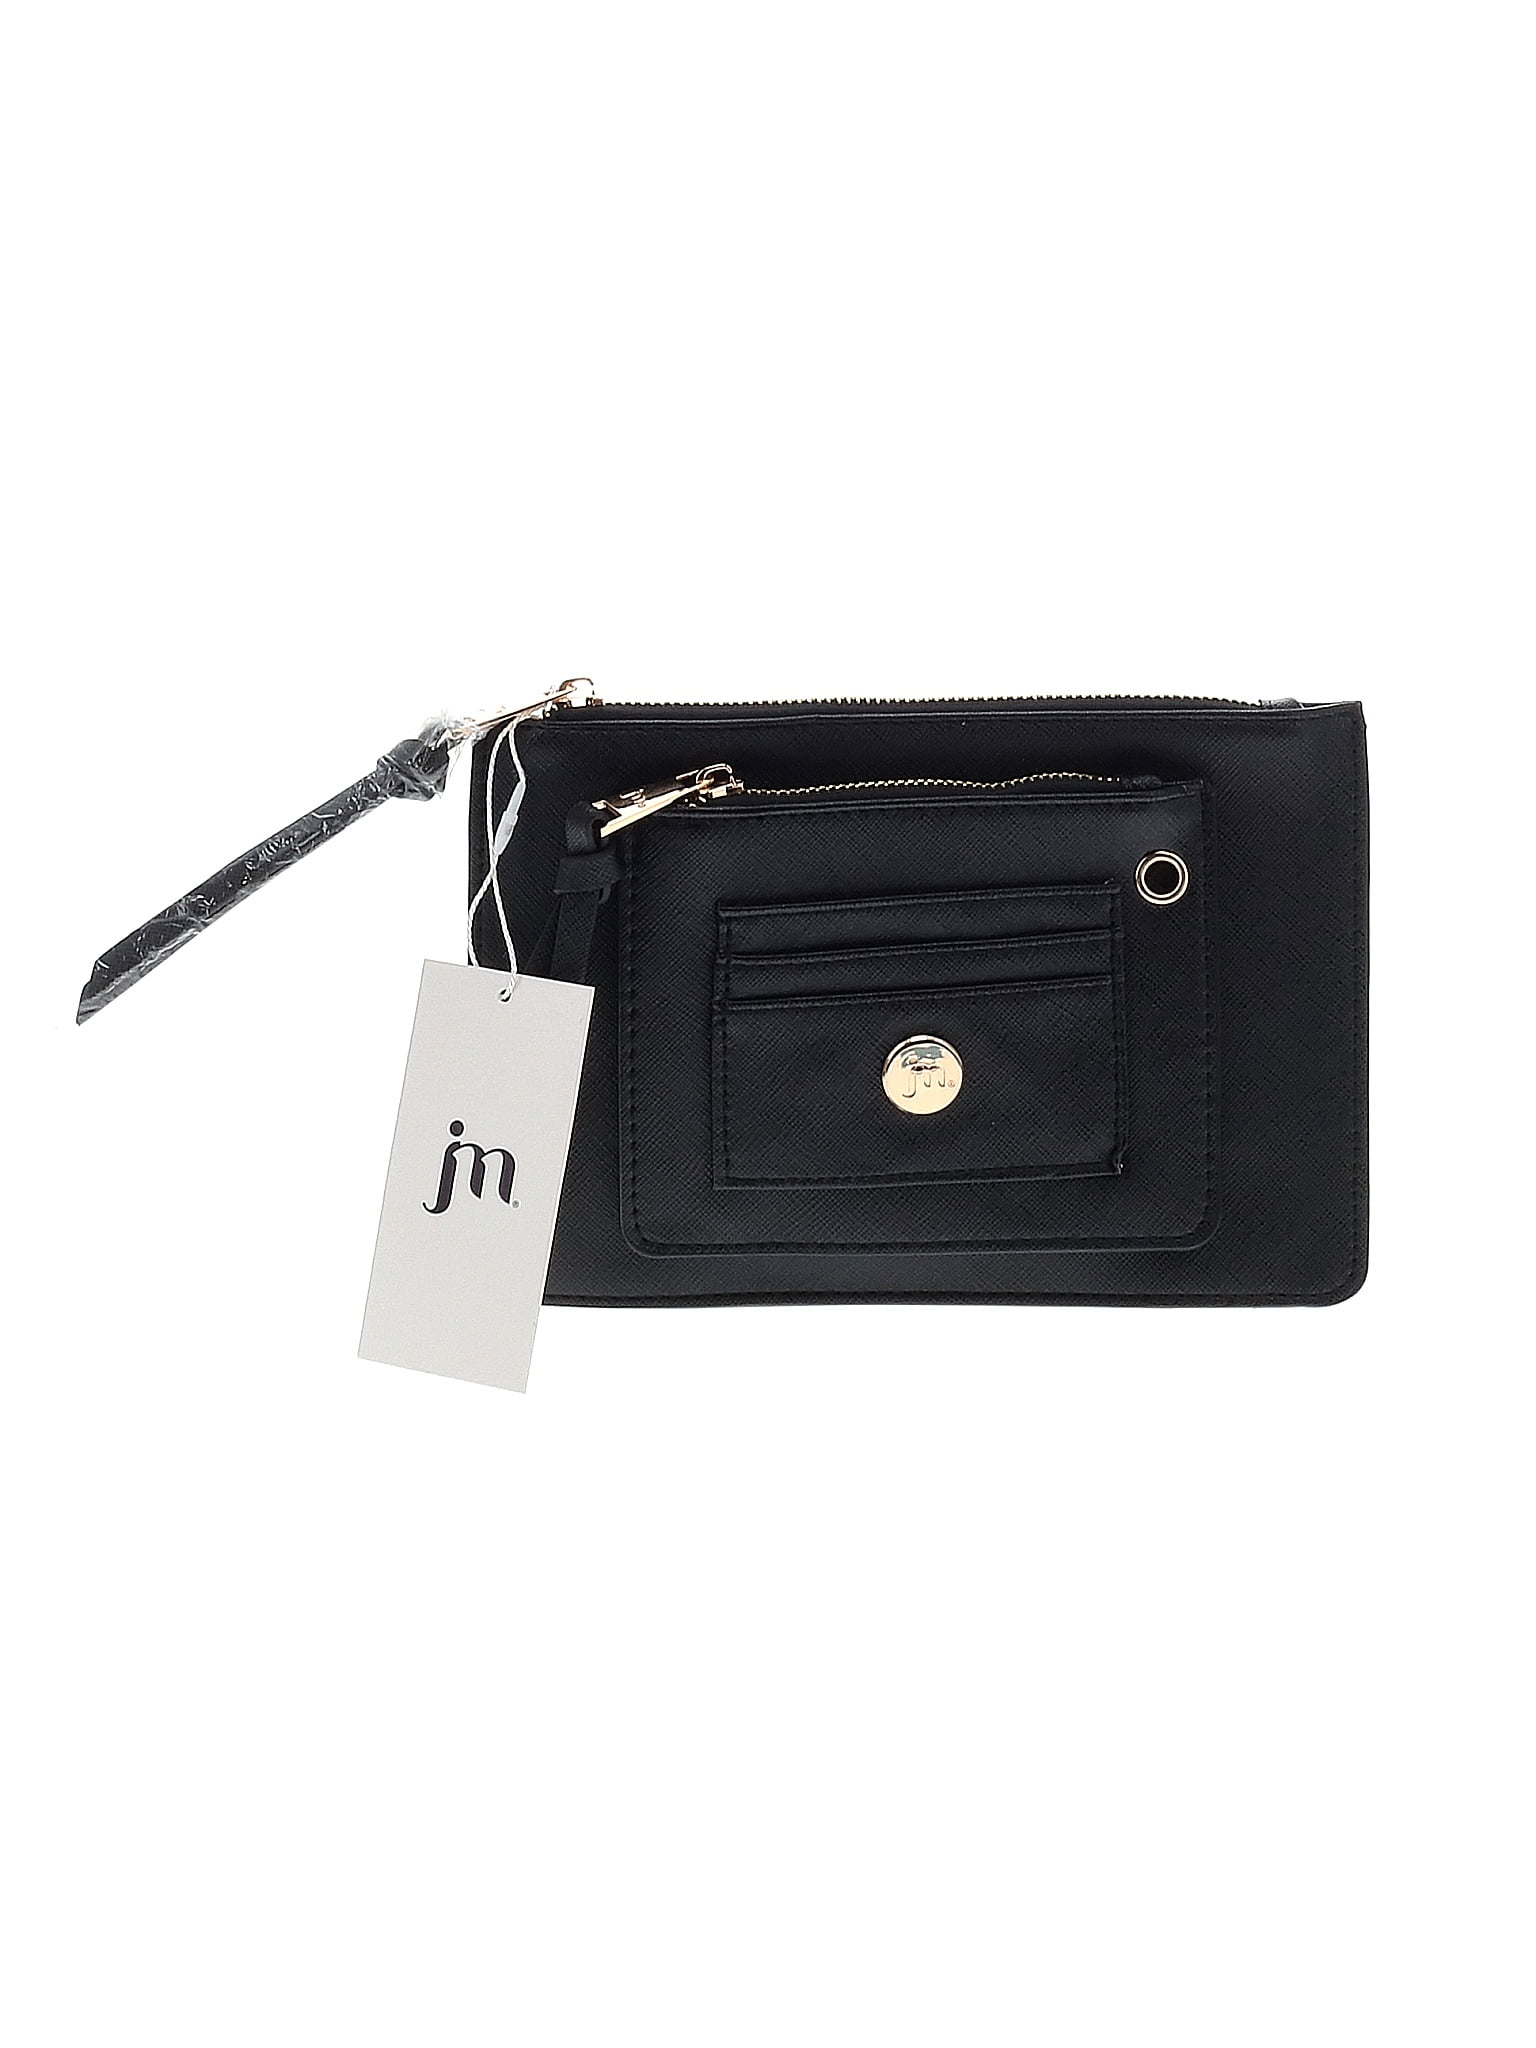 Jessica Moore Black Textured Leather Wallet